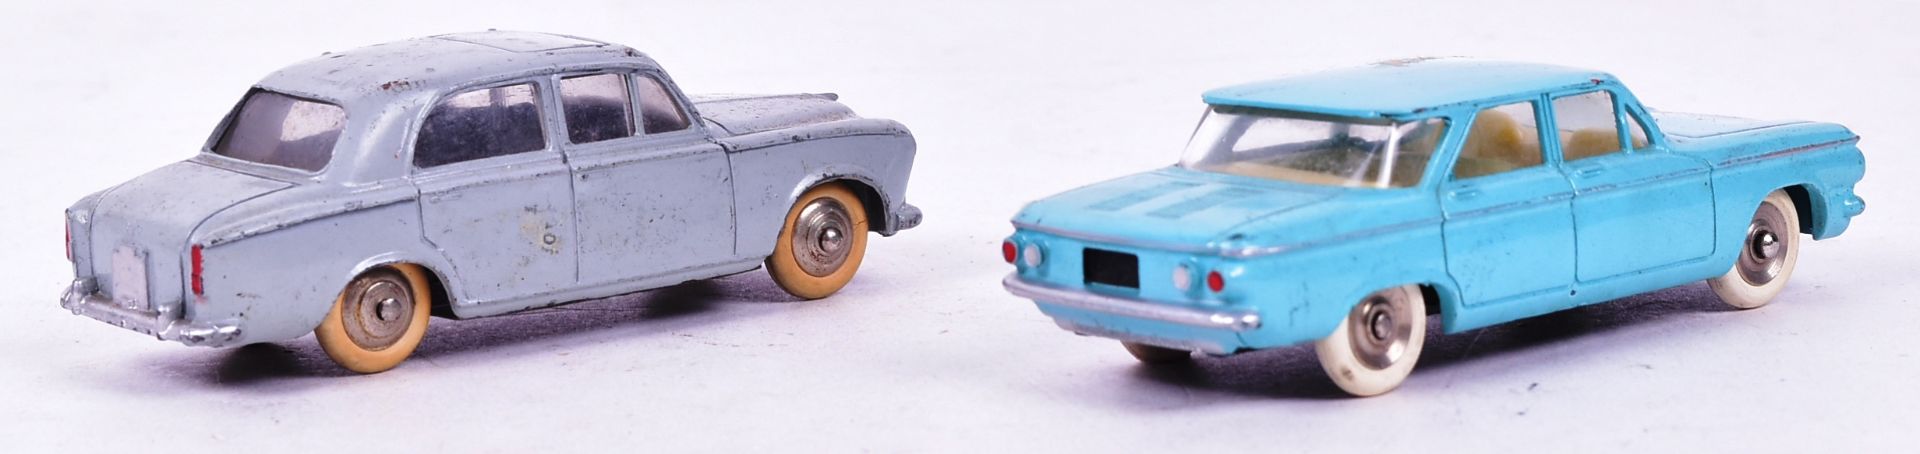 DIECAST - FRENCH DINKY TOYS - PEUGEOT 403 & CHEVROLET CORVAIR - Bild 2 aus 6